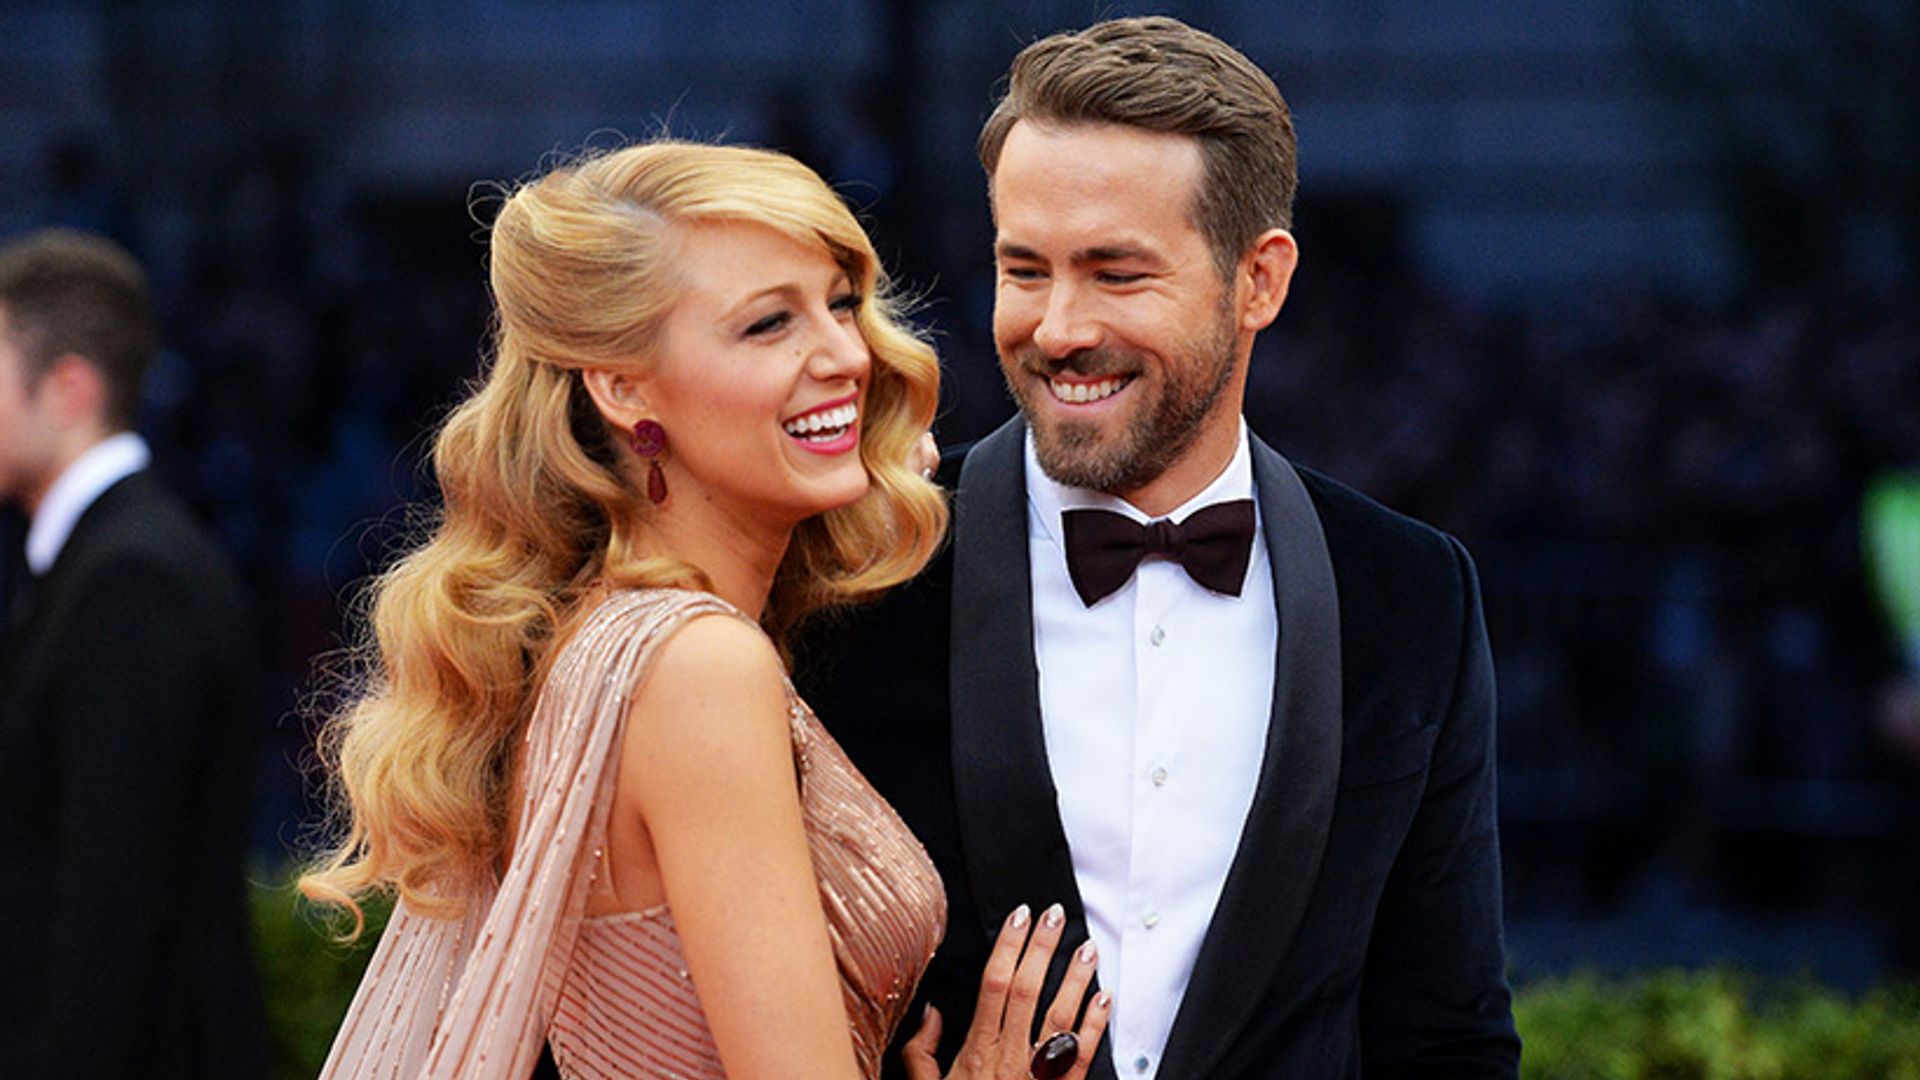 Check out Ryan Reynolds' hilarious birthday message to wife Blake Lively